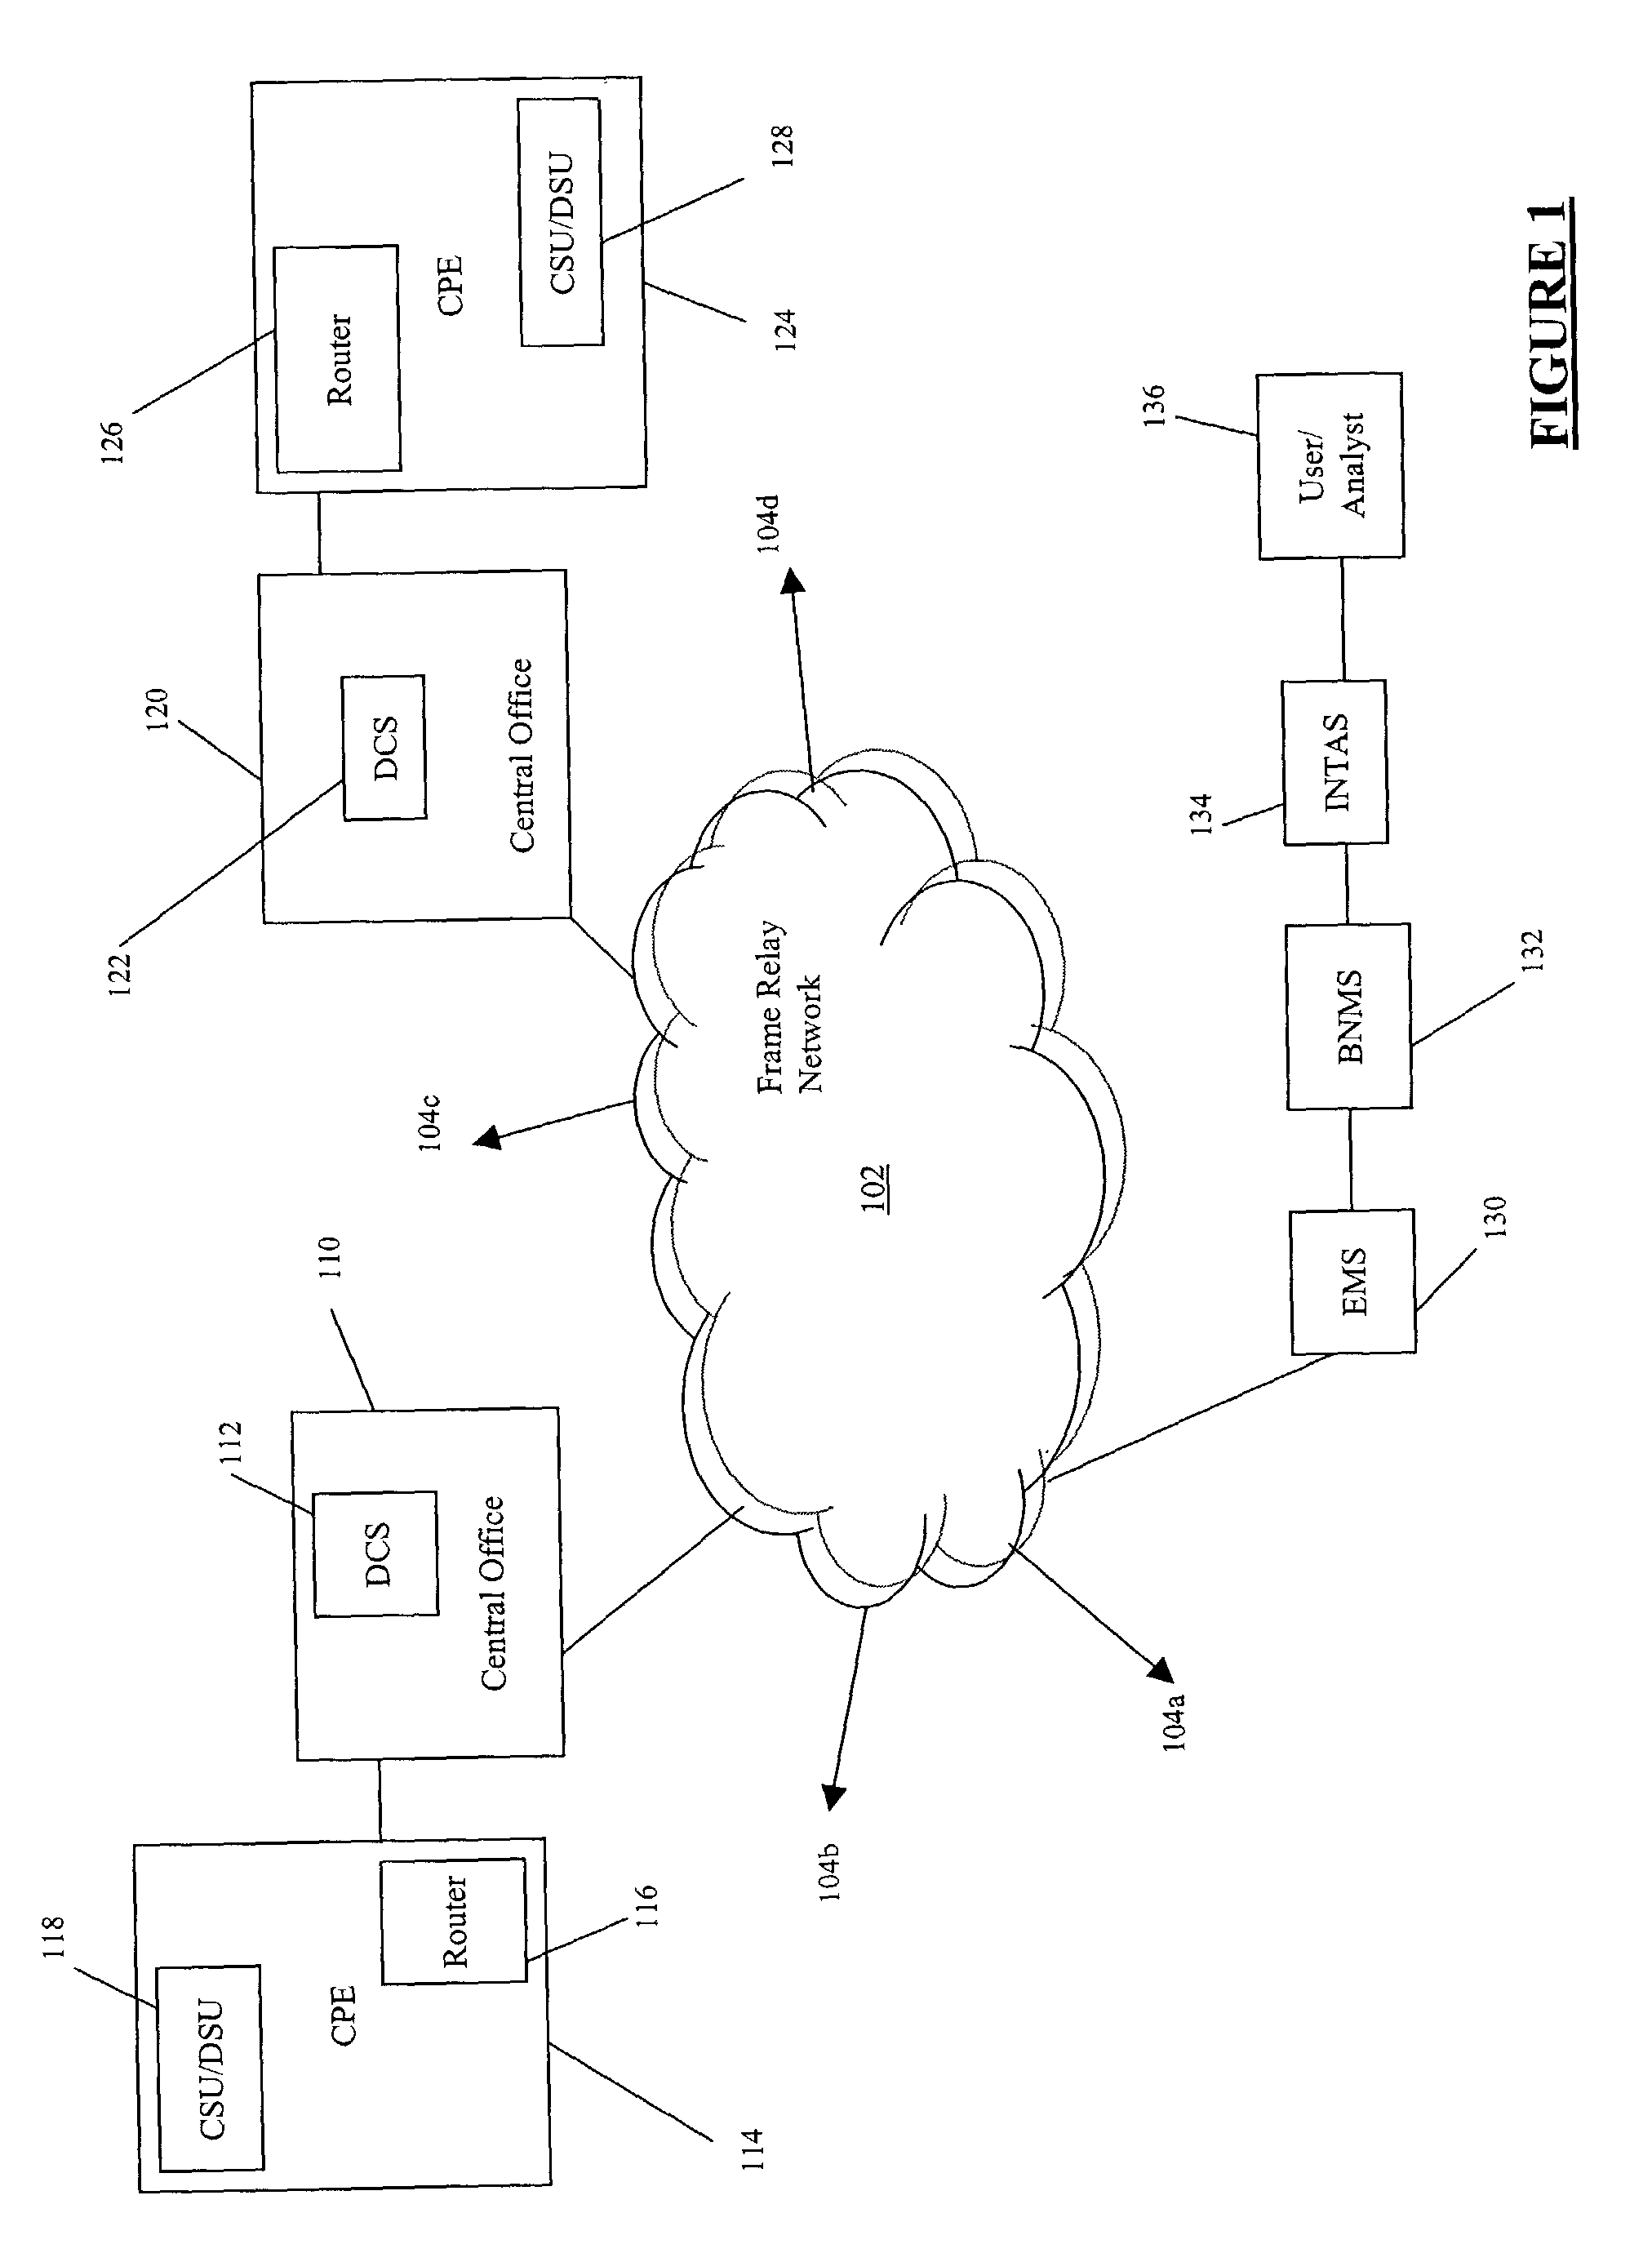 Method and system for retrieving link management interface status for a logical port